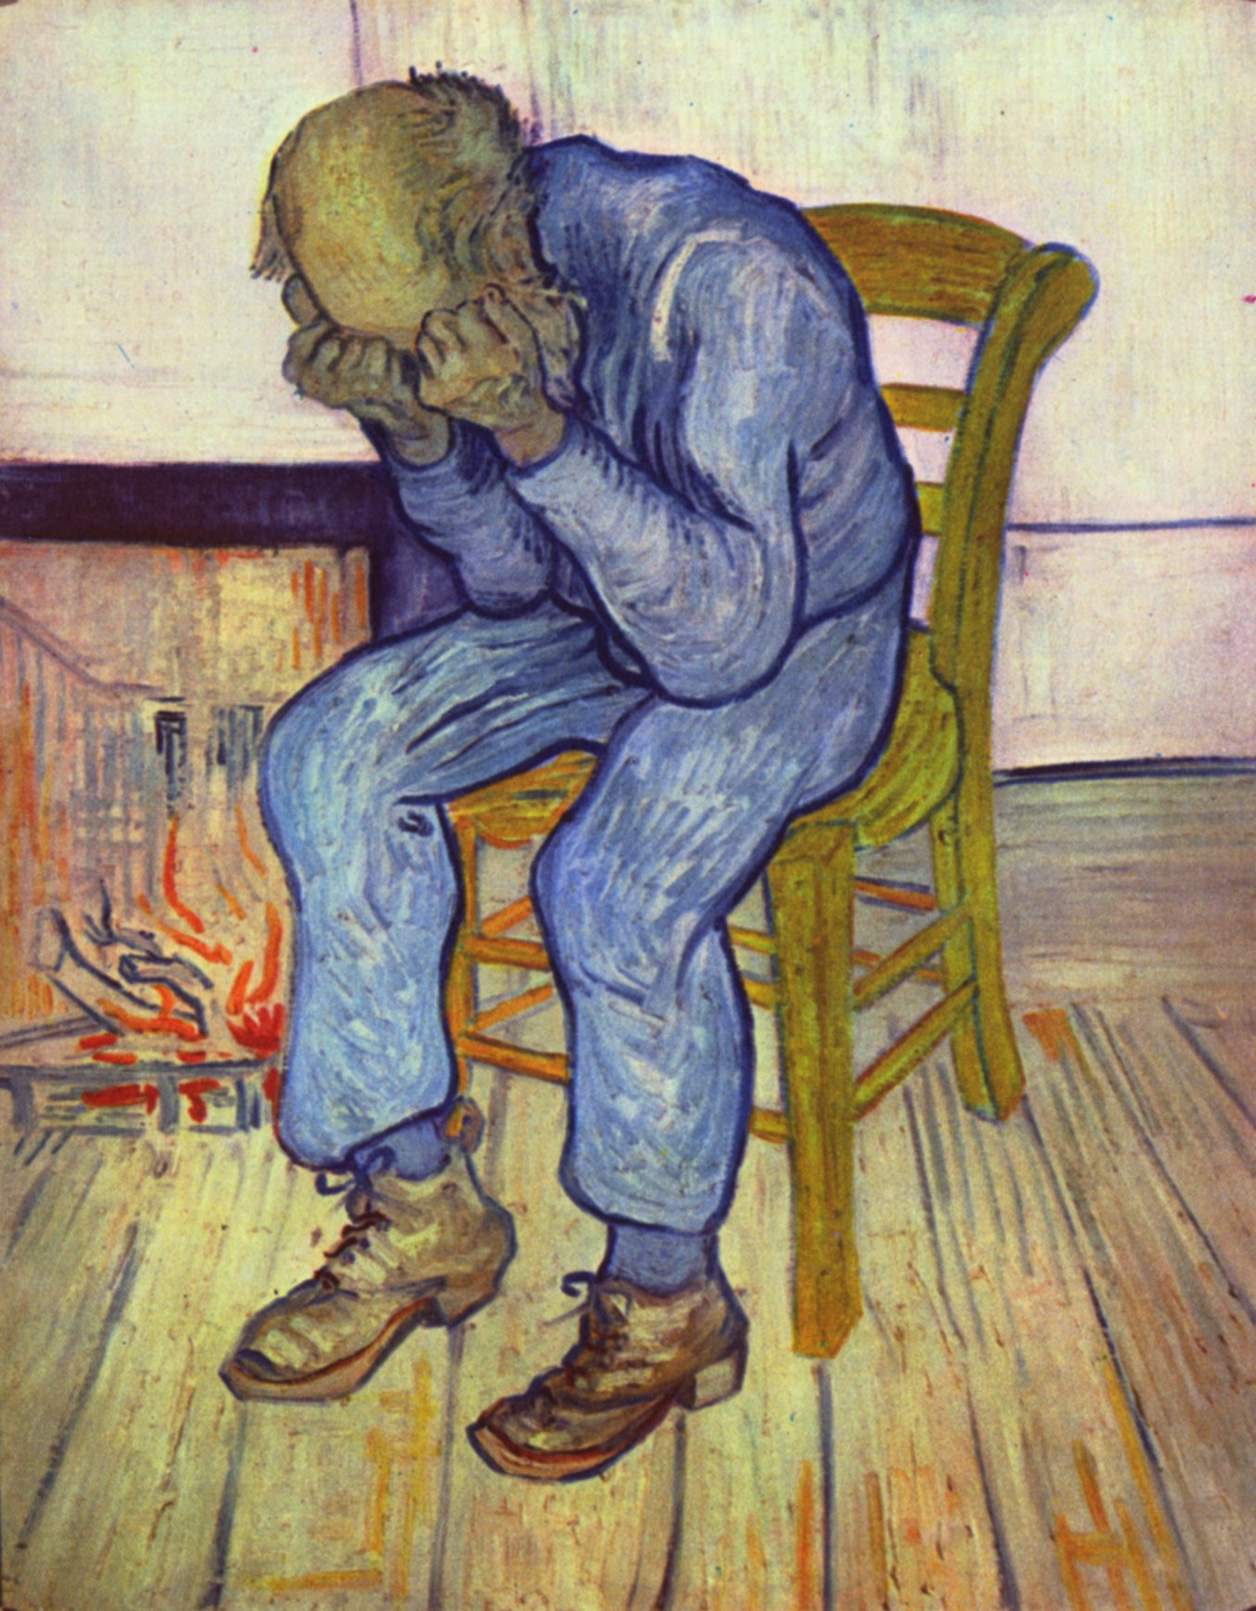 Painting of man bent over holding head in hands